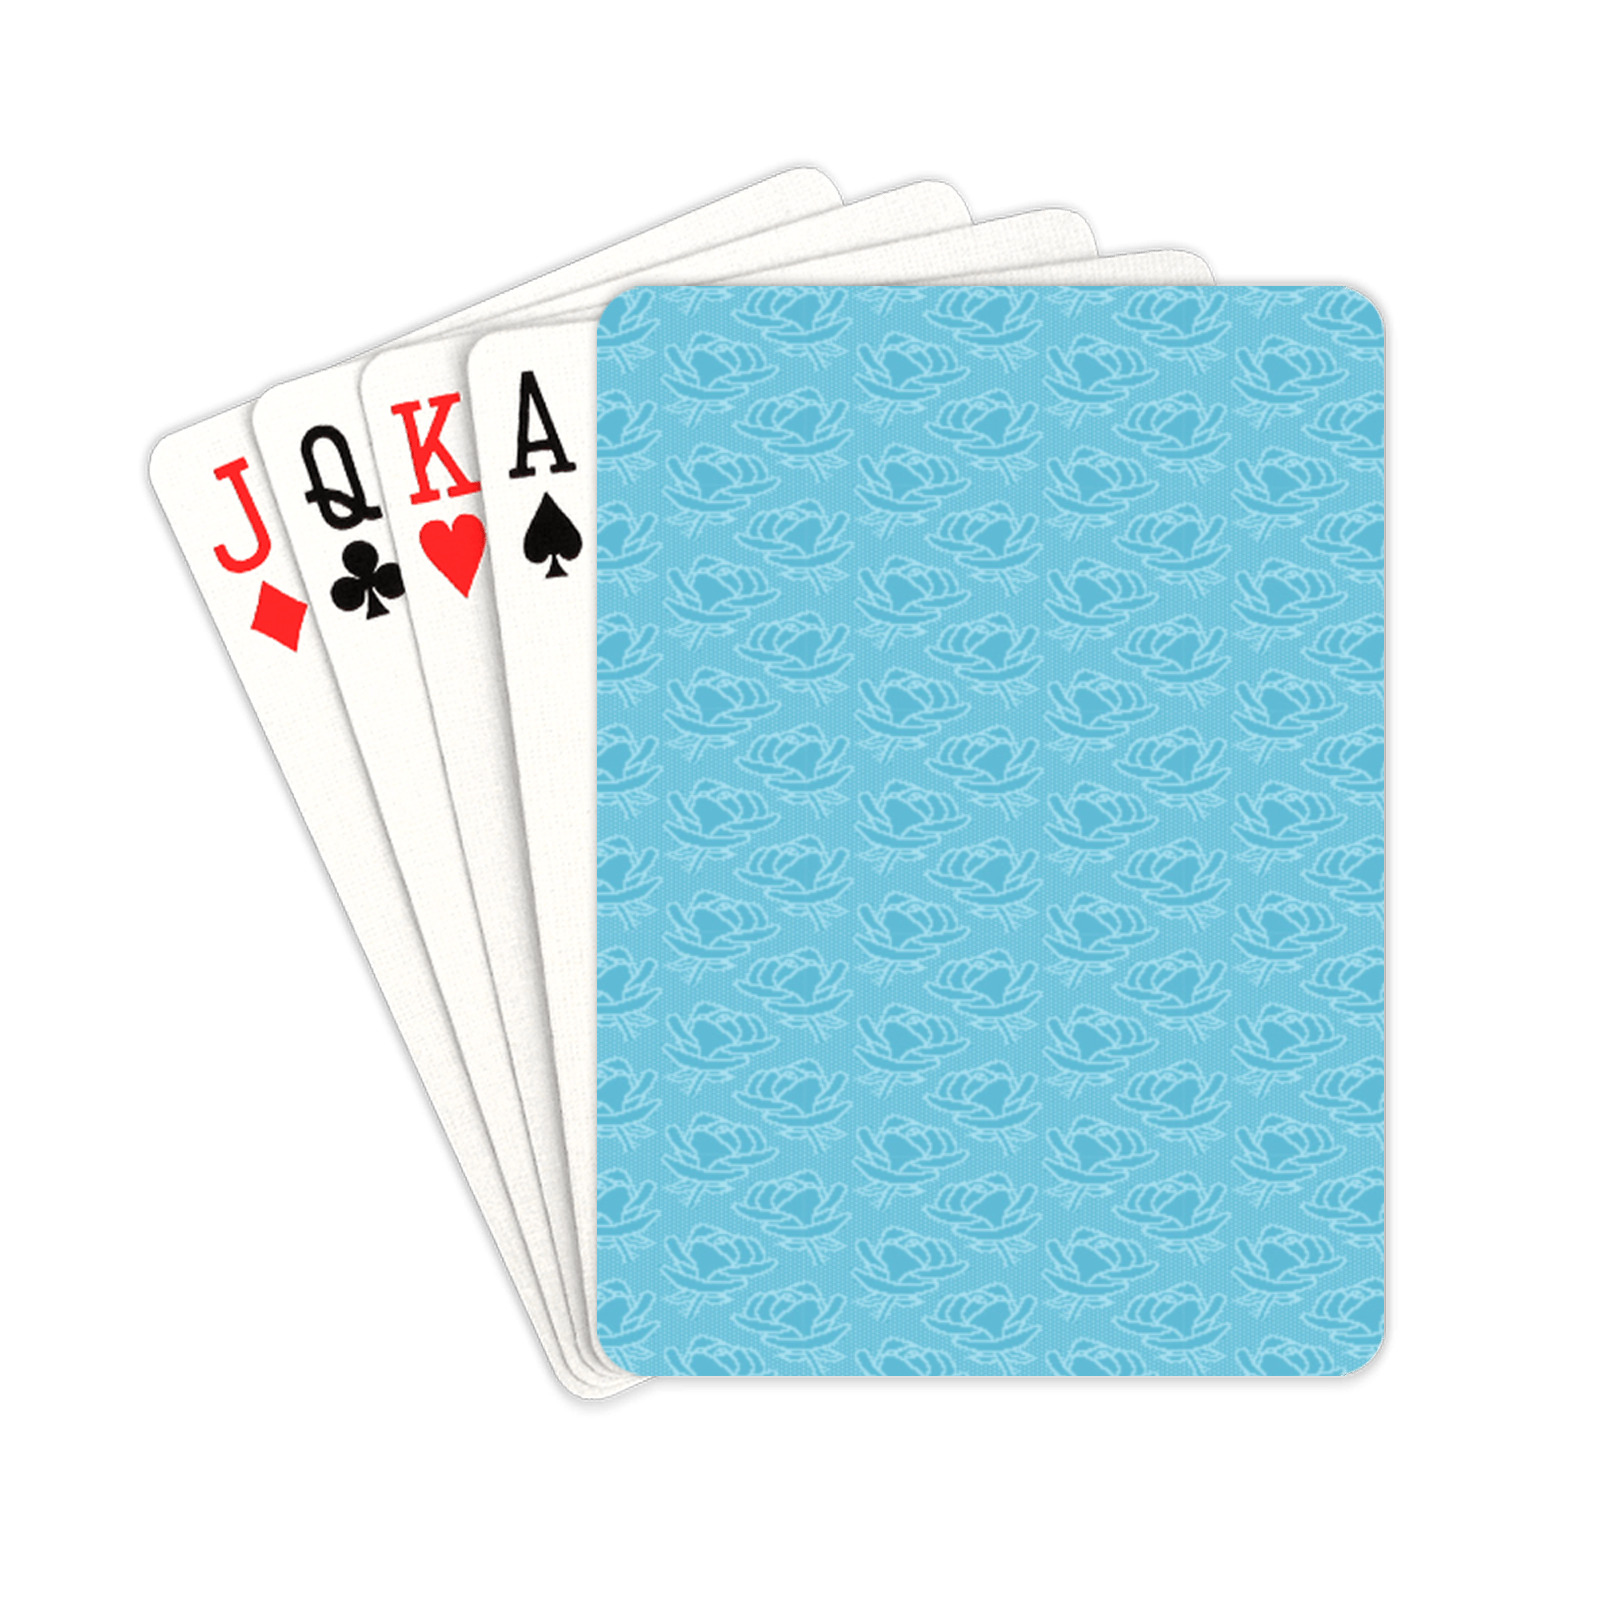 retro blue pattern Playing Cards 2.5"x3.5"